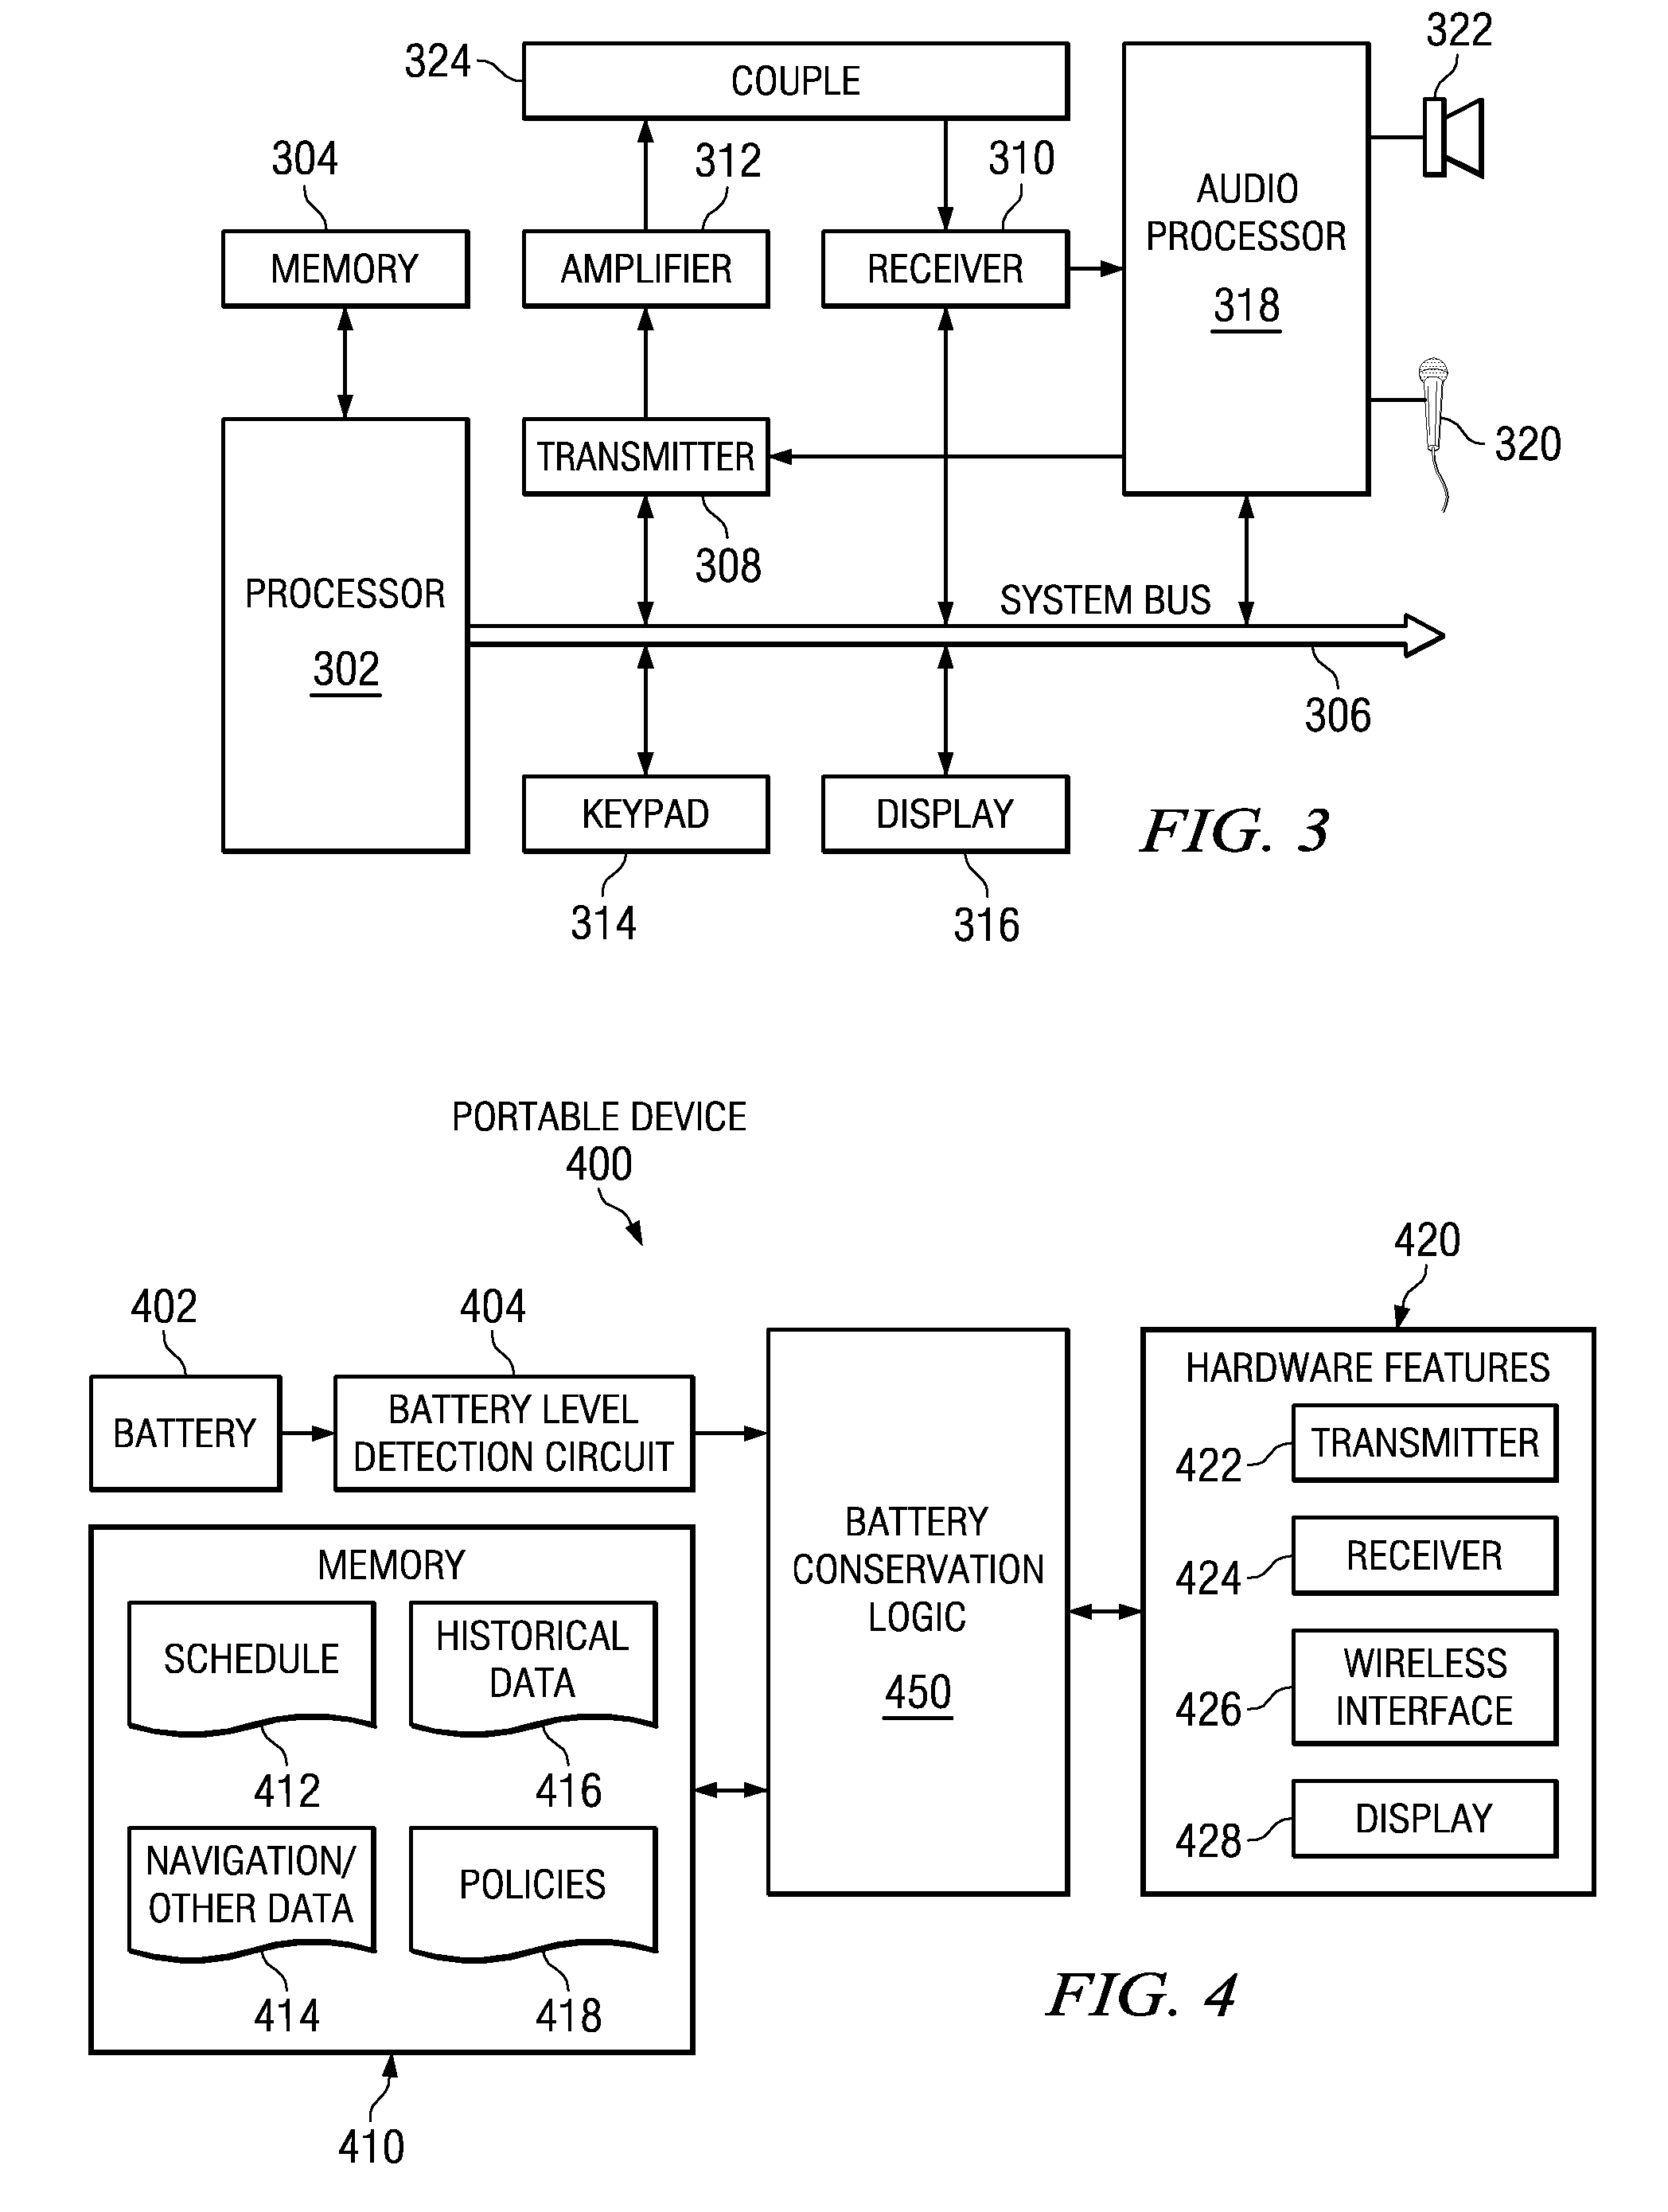 Method, apparatus, and computer program product to manage battery needs in a portable device